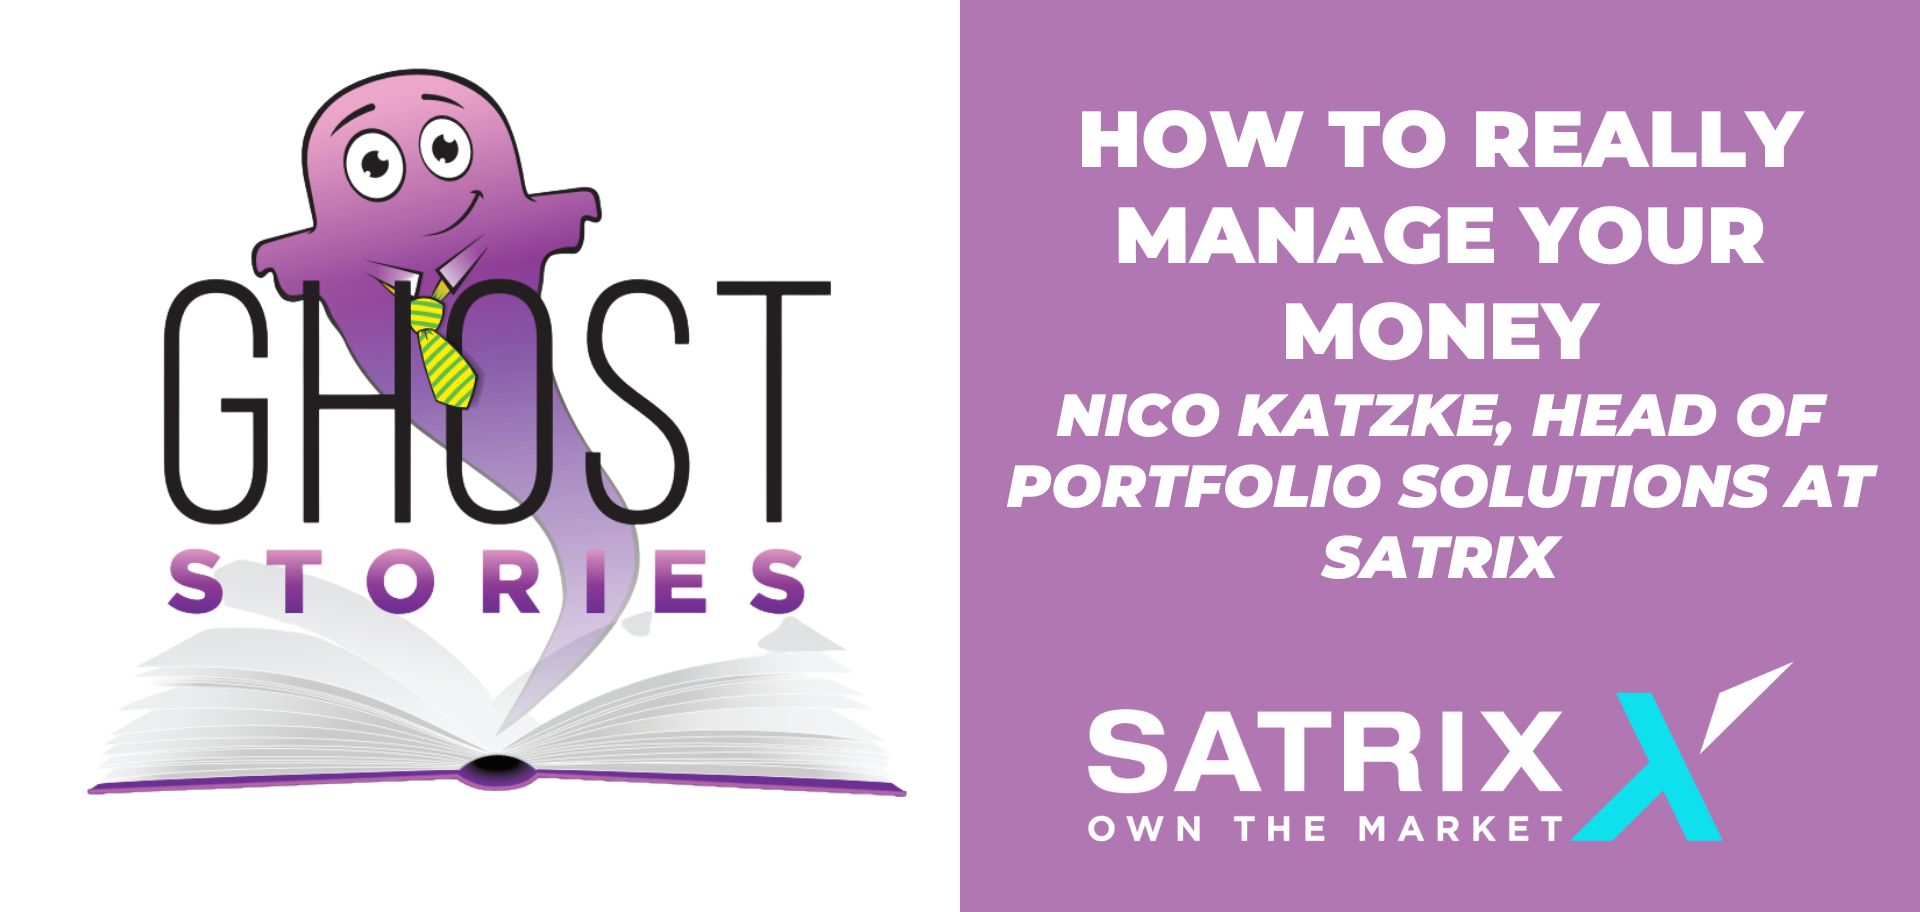 Ghost Stories Ep26: How to really manage your money (with Nico Katzke of Satrix)